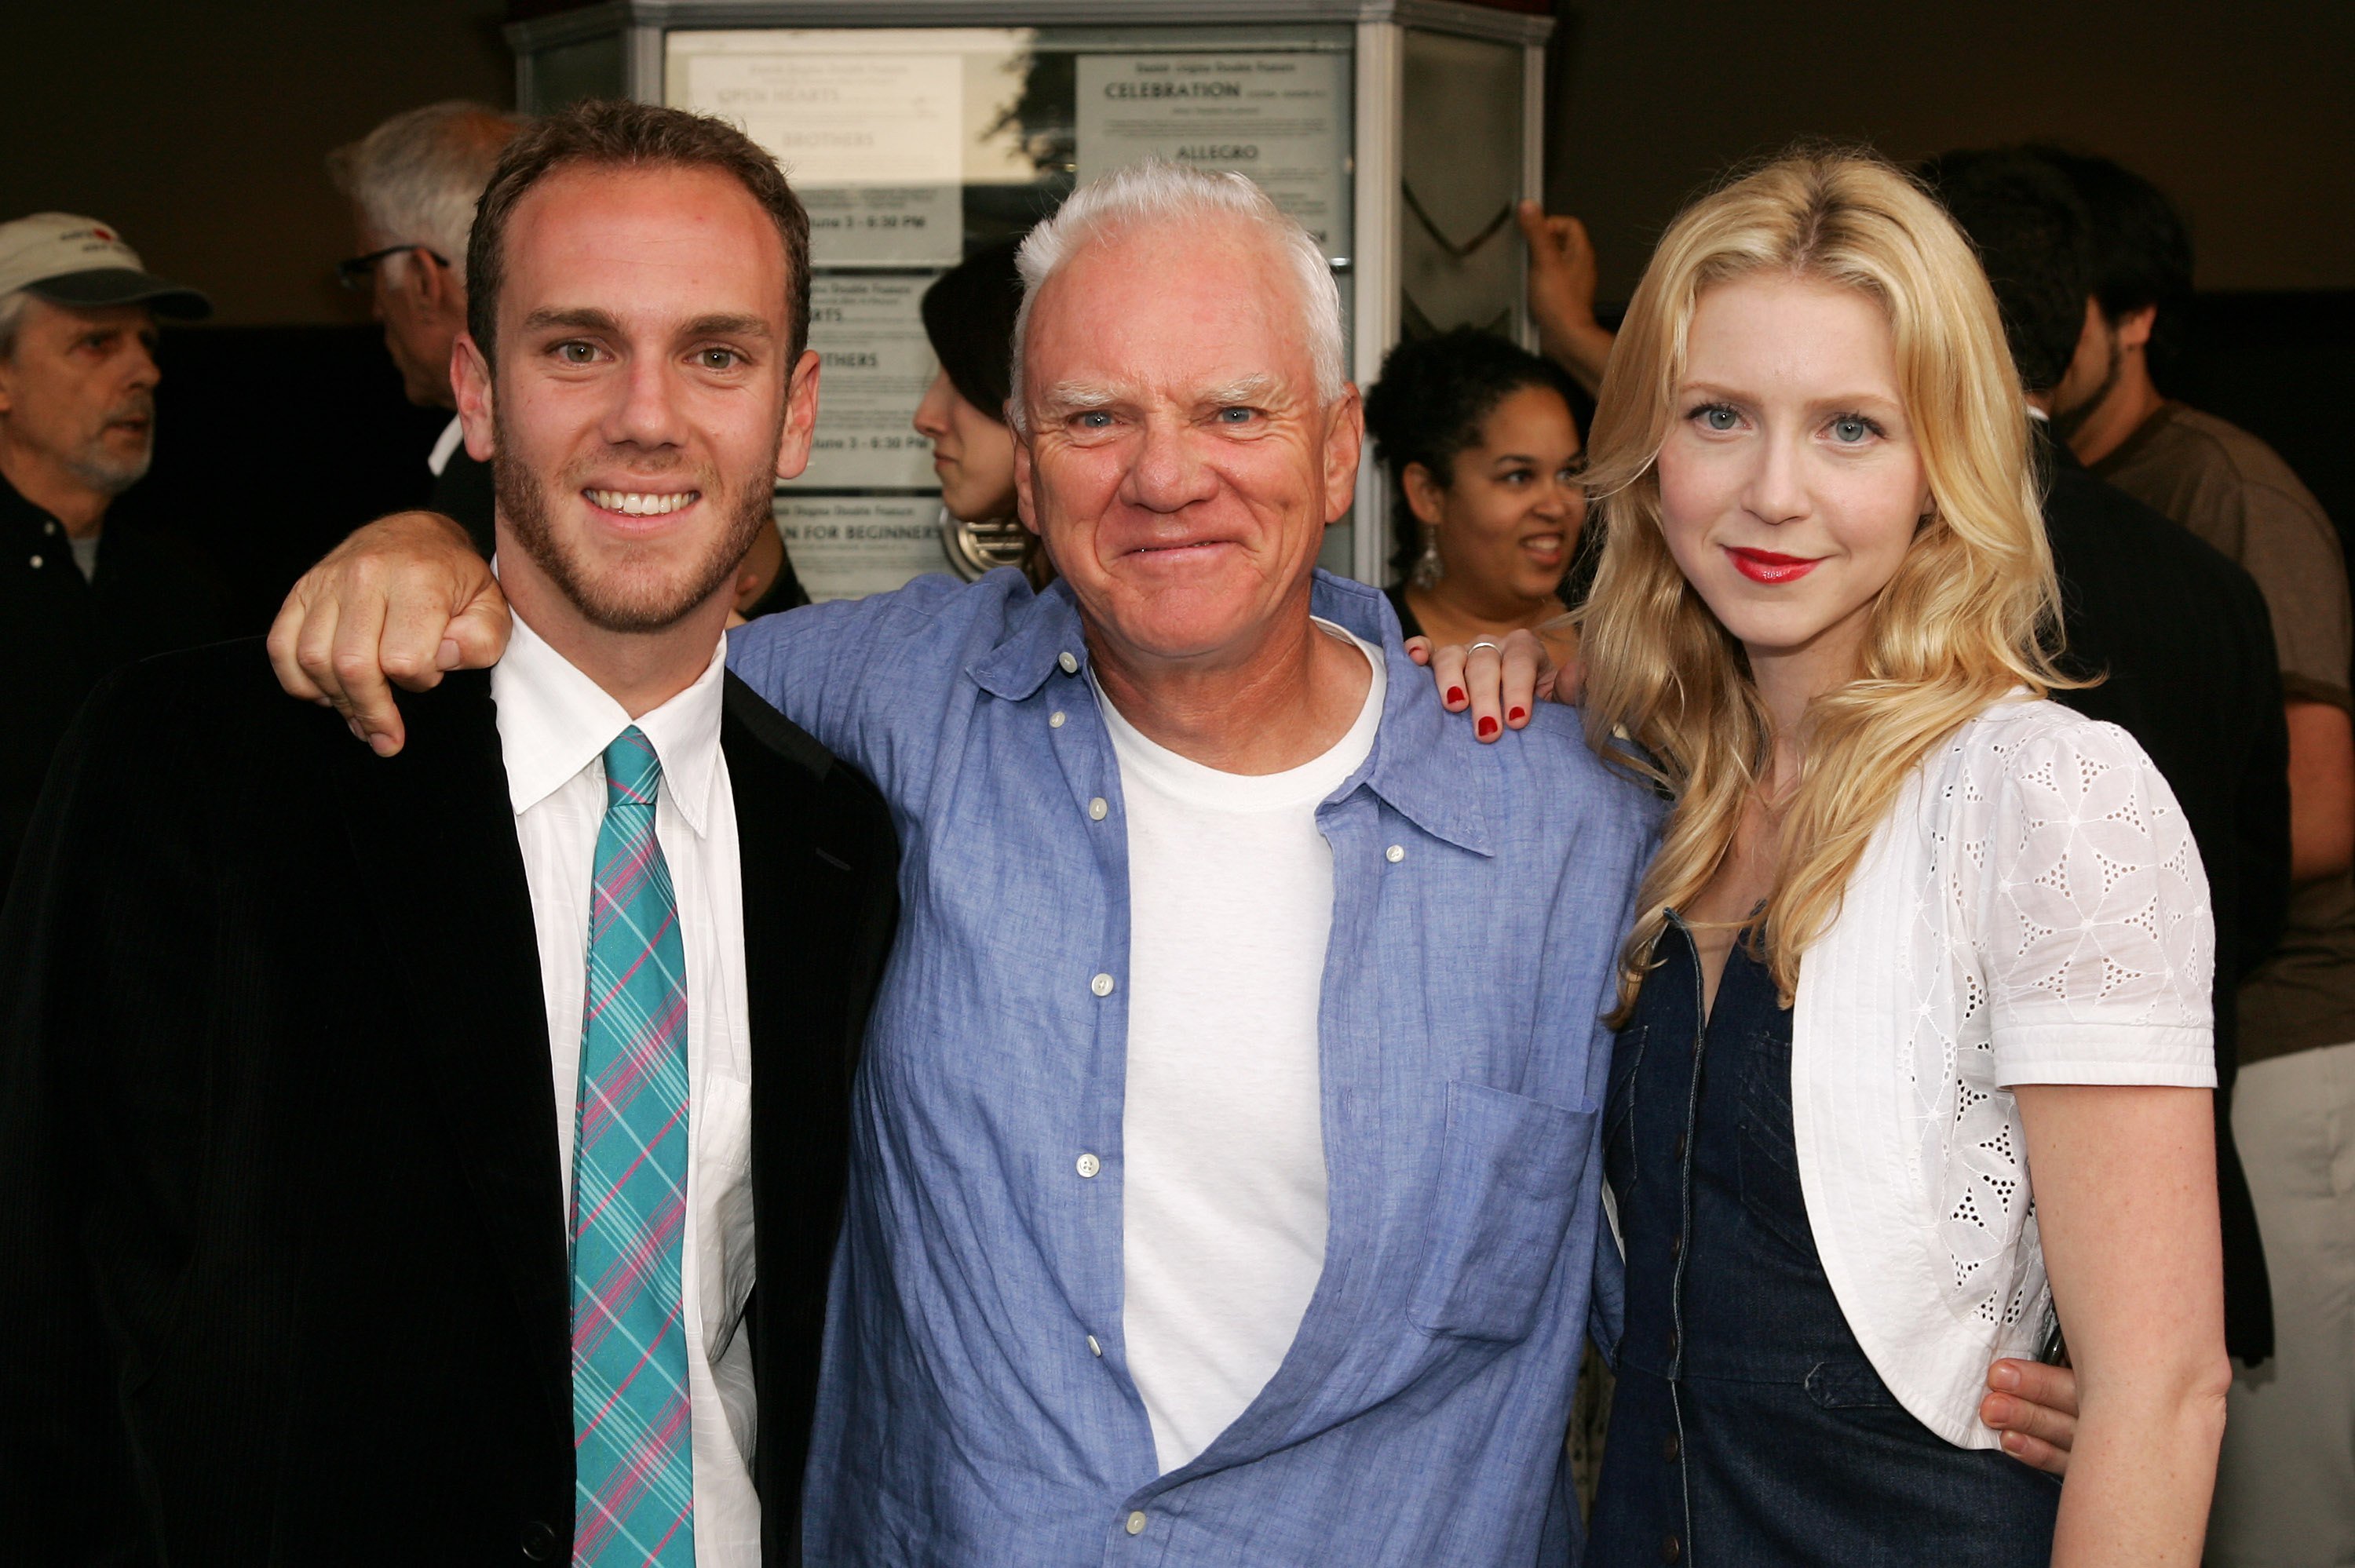 Charlie McDowell, Malcolm McDowell, and Lilly McDowell at the premiere of "Bye Bye Benjamin" on June 5, 2006, in Los Angeles | Source: Getty Images